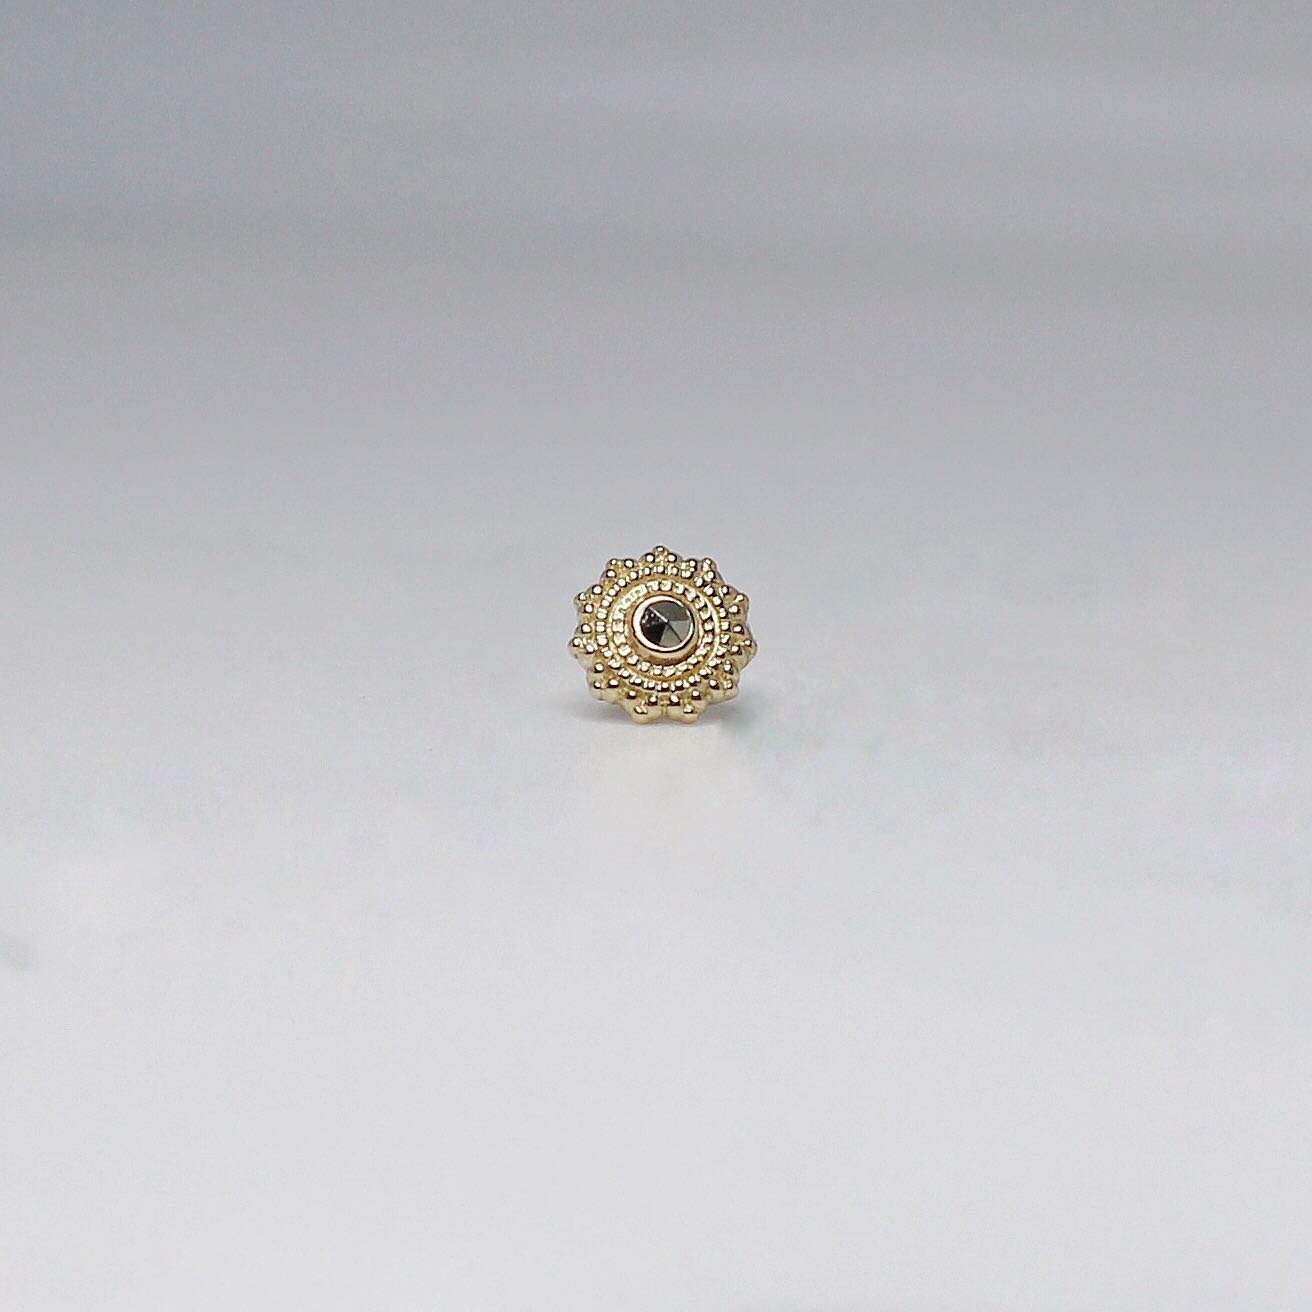 We just got some pieces in with marcasite 🖤loving the contrast between the dark and bright gold 🌟
.
.
.
.
.

#thepowersthatbe #vancouverwa #vanwa #piercing #safepiercing #appmember #bodypiercing #piercingjewelry #finejewery #goldjewelry #cartilagep